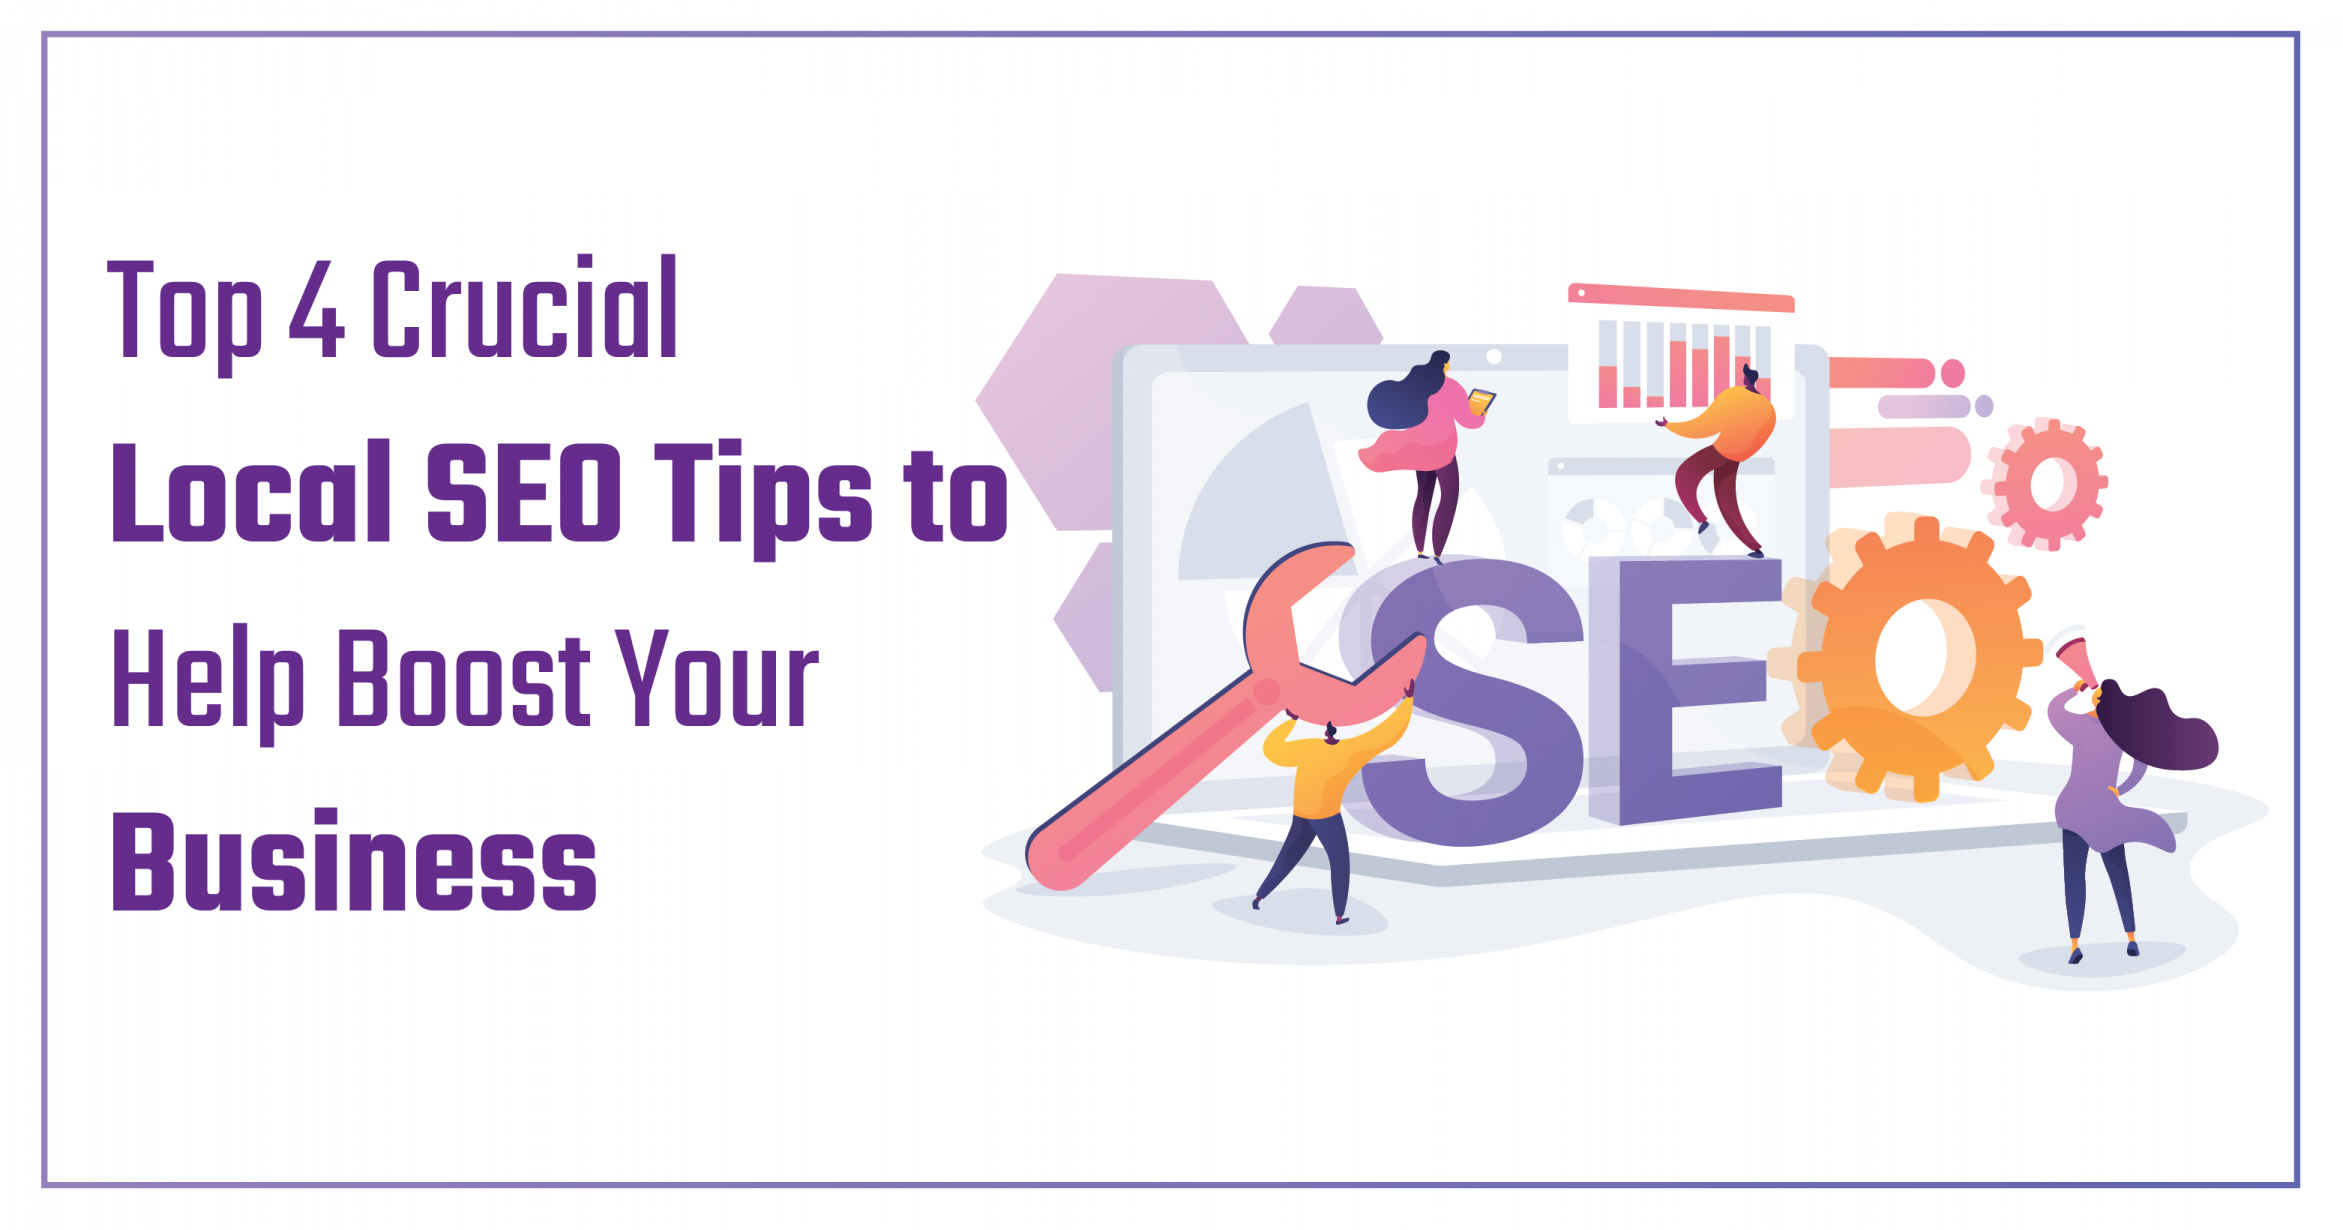 Top 4 Crucial Local SEO Tips to Help Boost Your Business